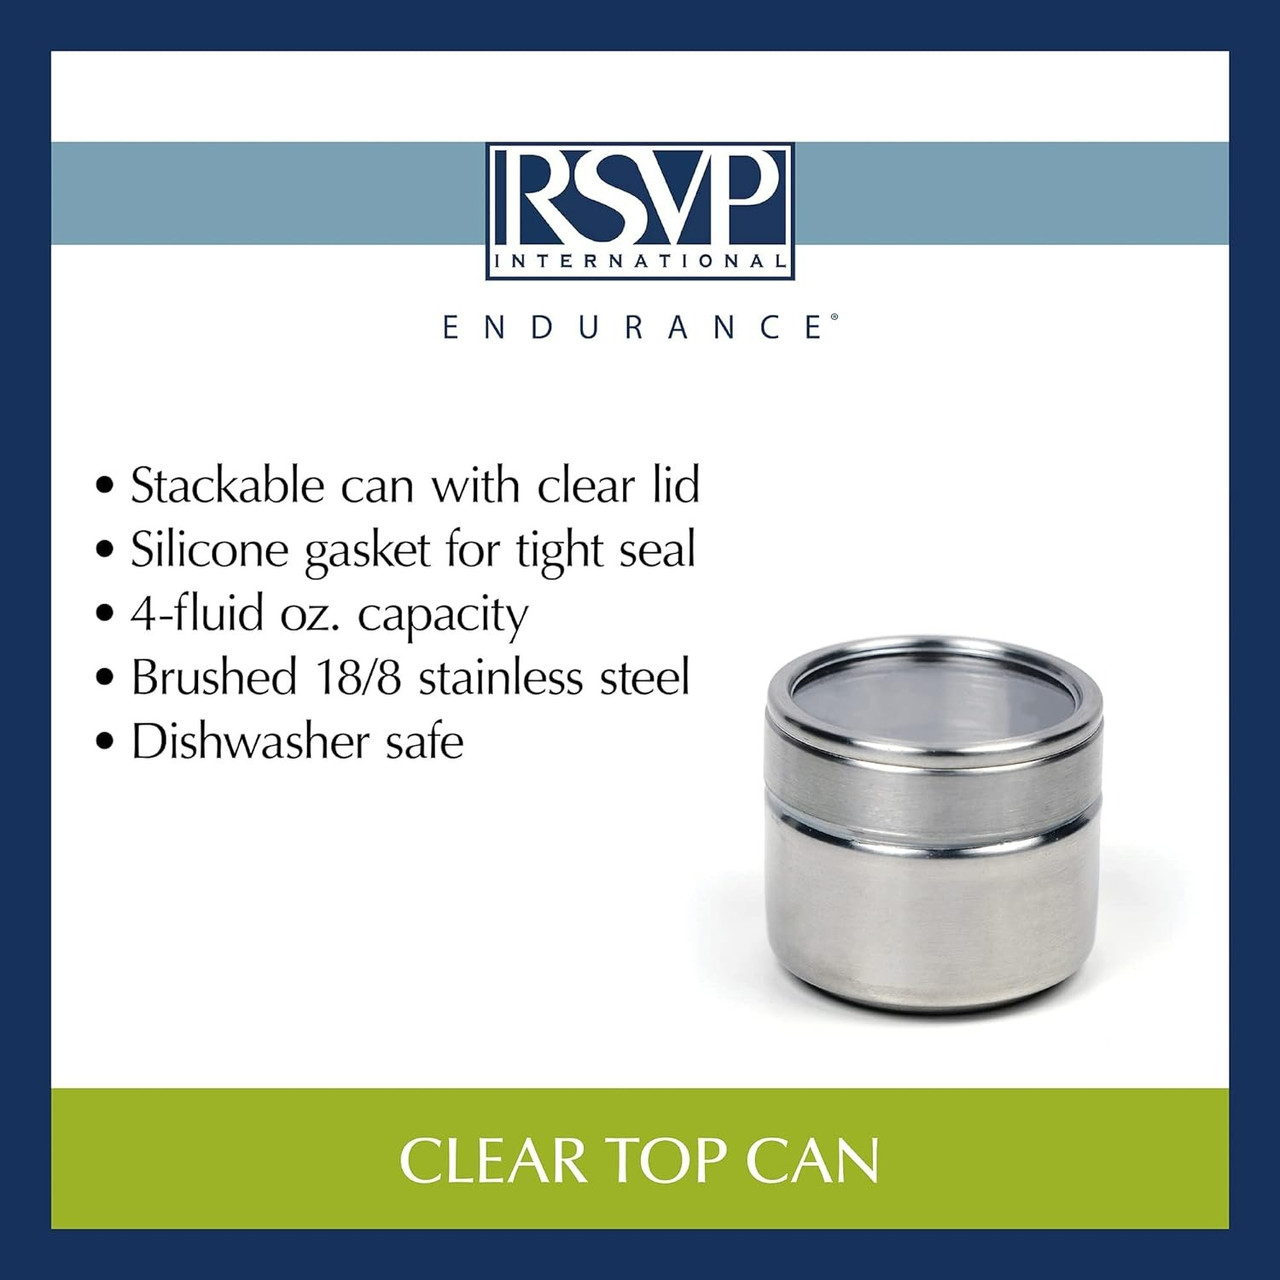 RSVP Endurance® Stainless Steel Collection - Clear-Top Spice Can - 4-Ounce Info